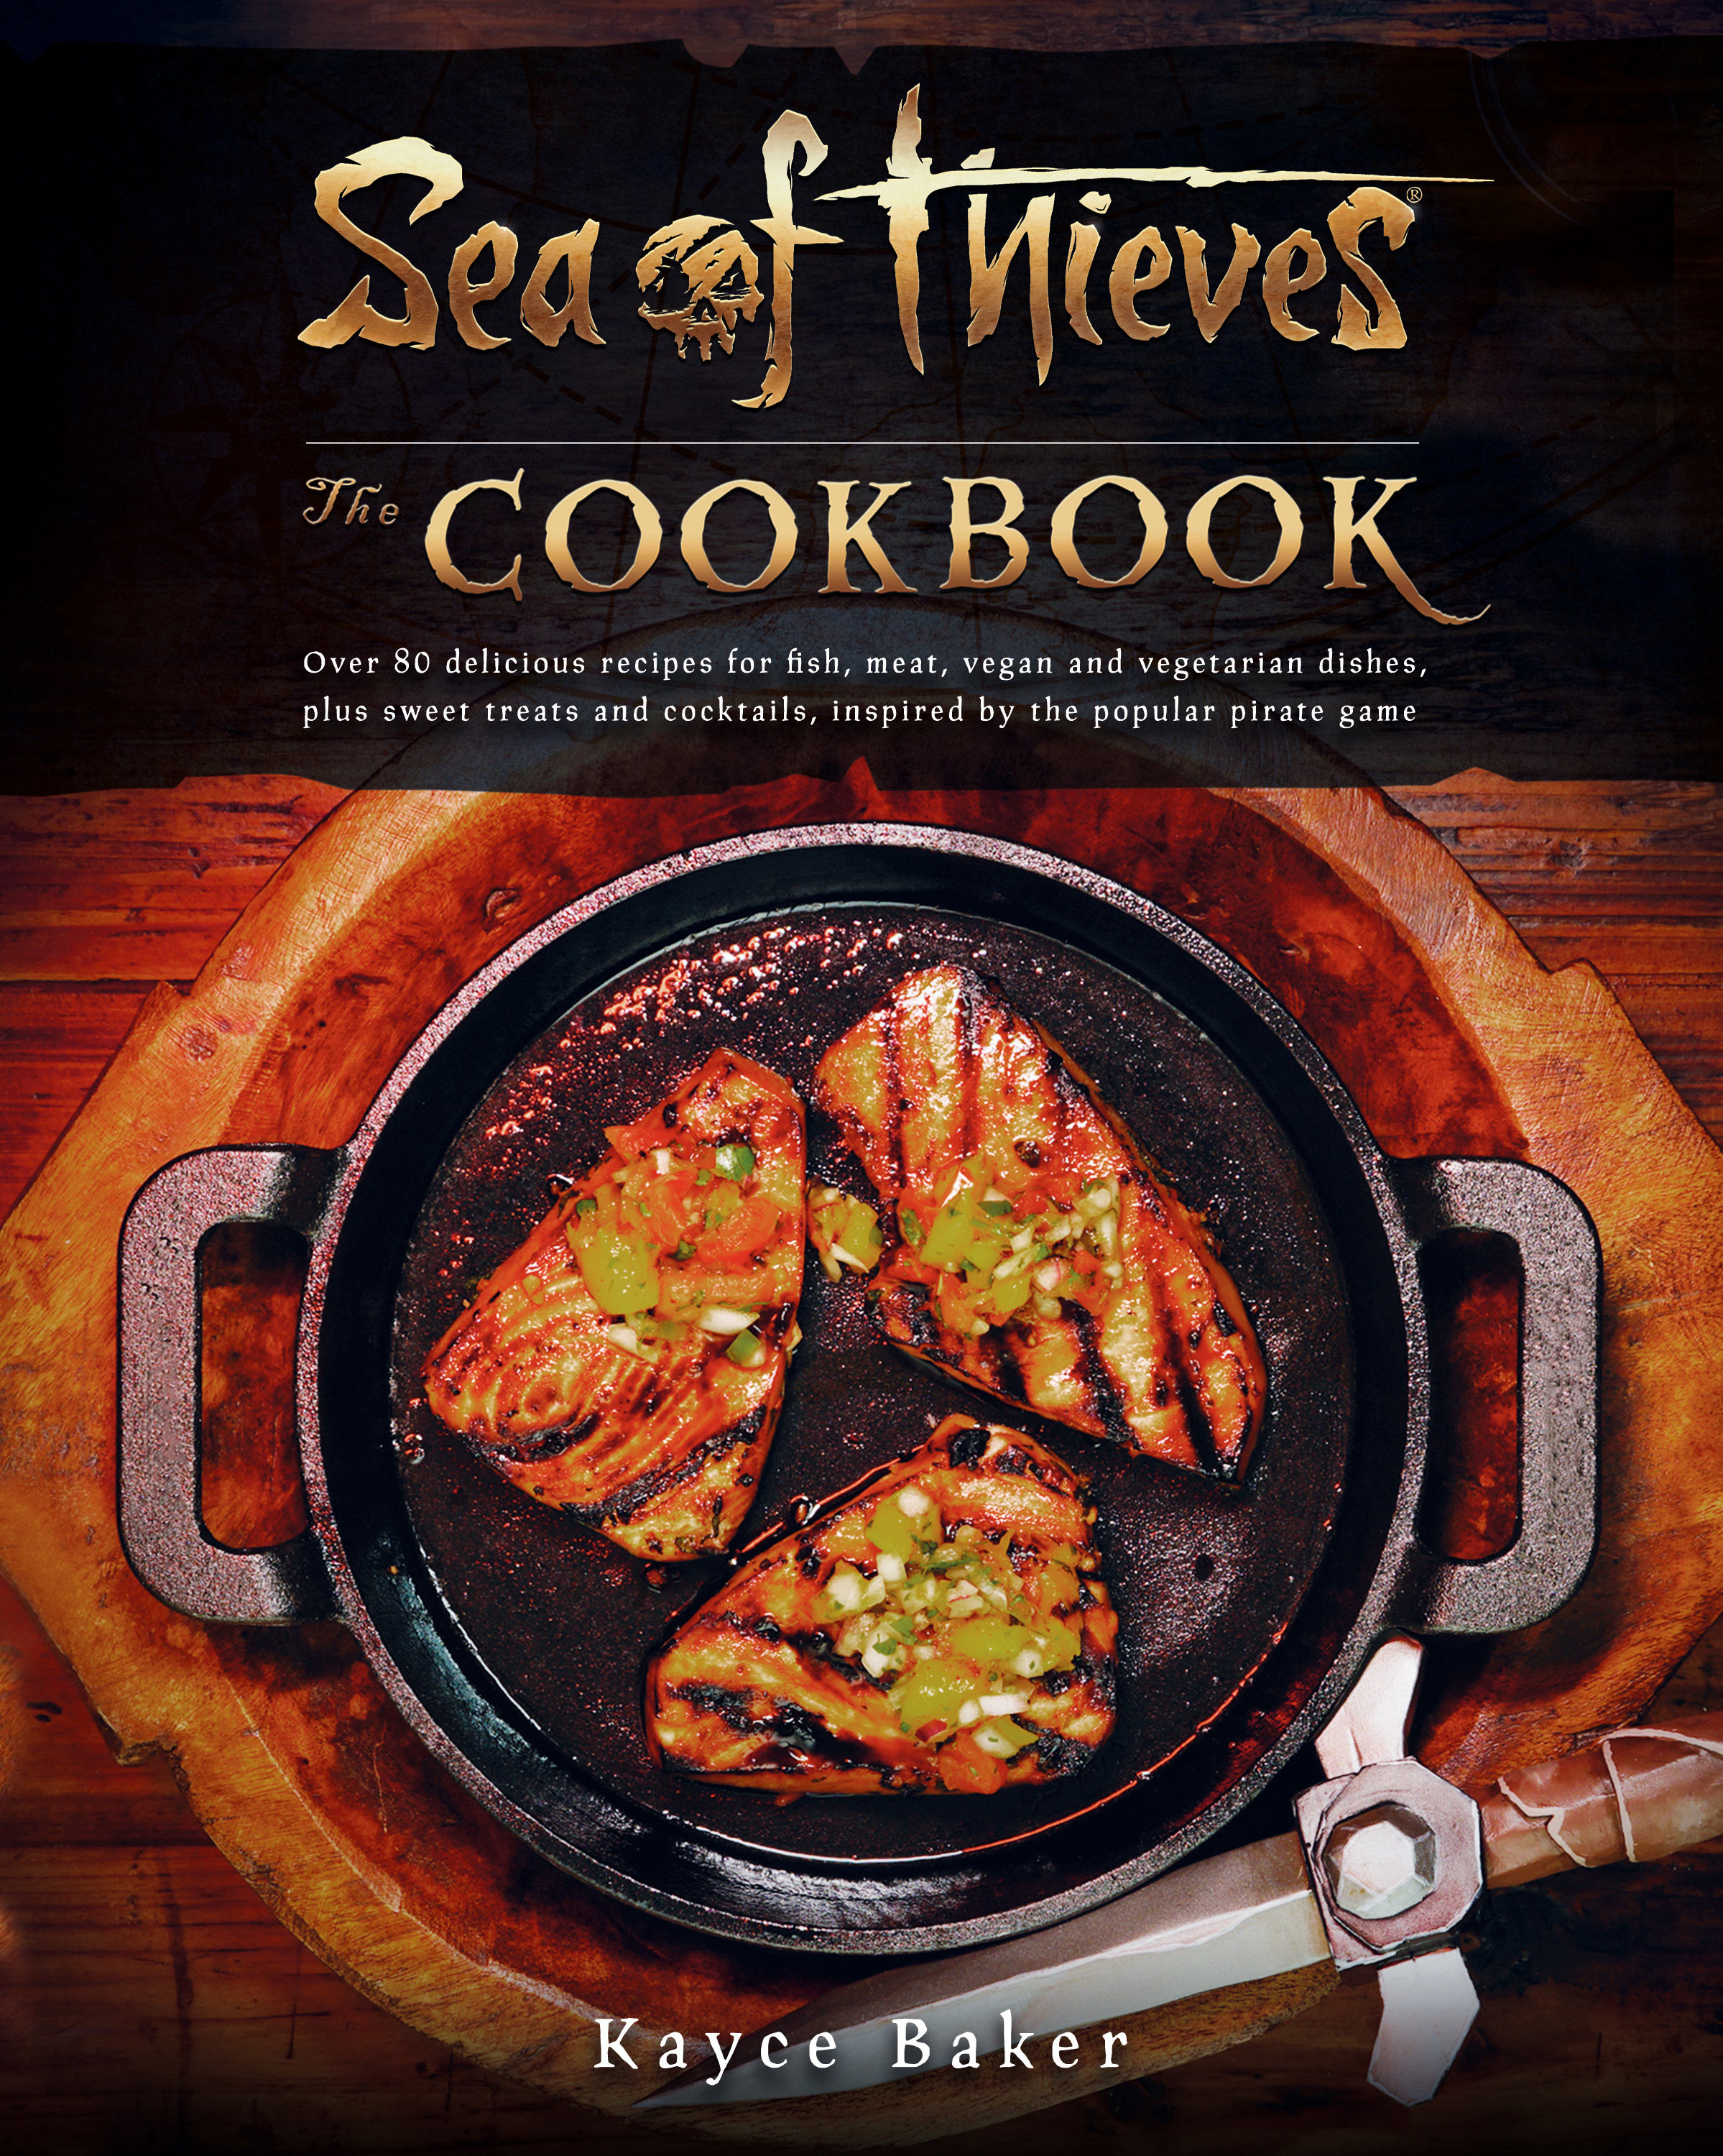 Sea of Thieves Cookbook Hardcover